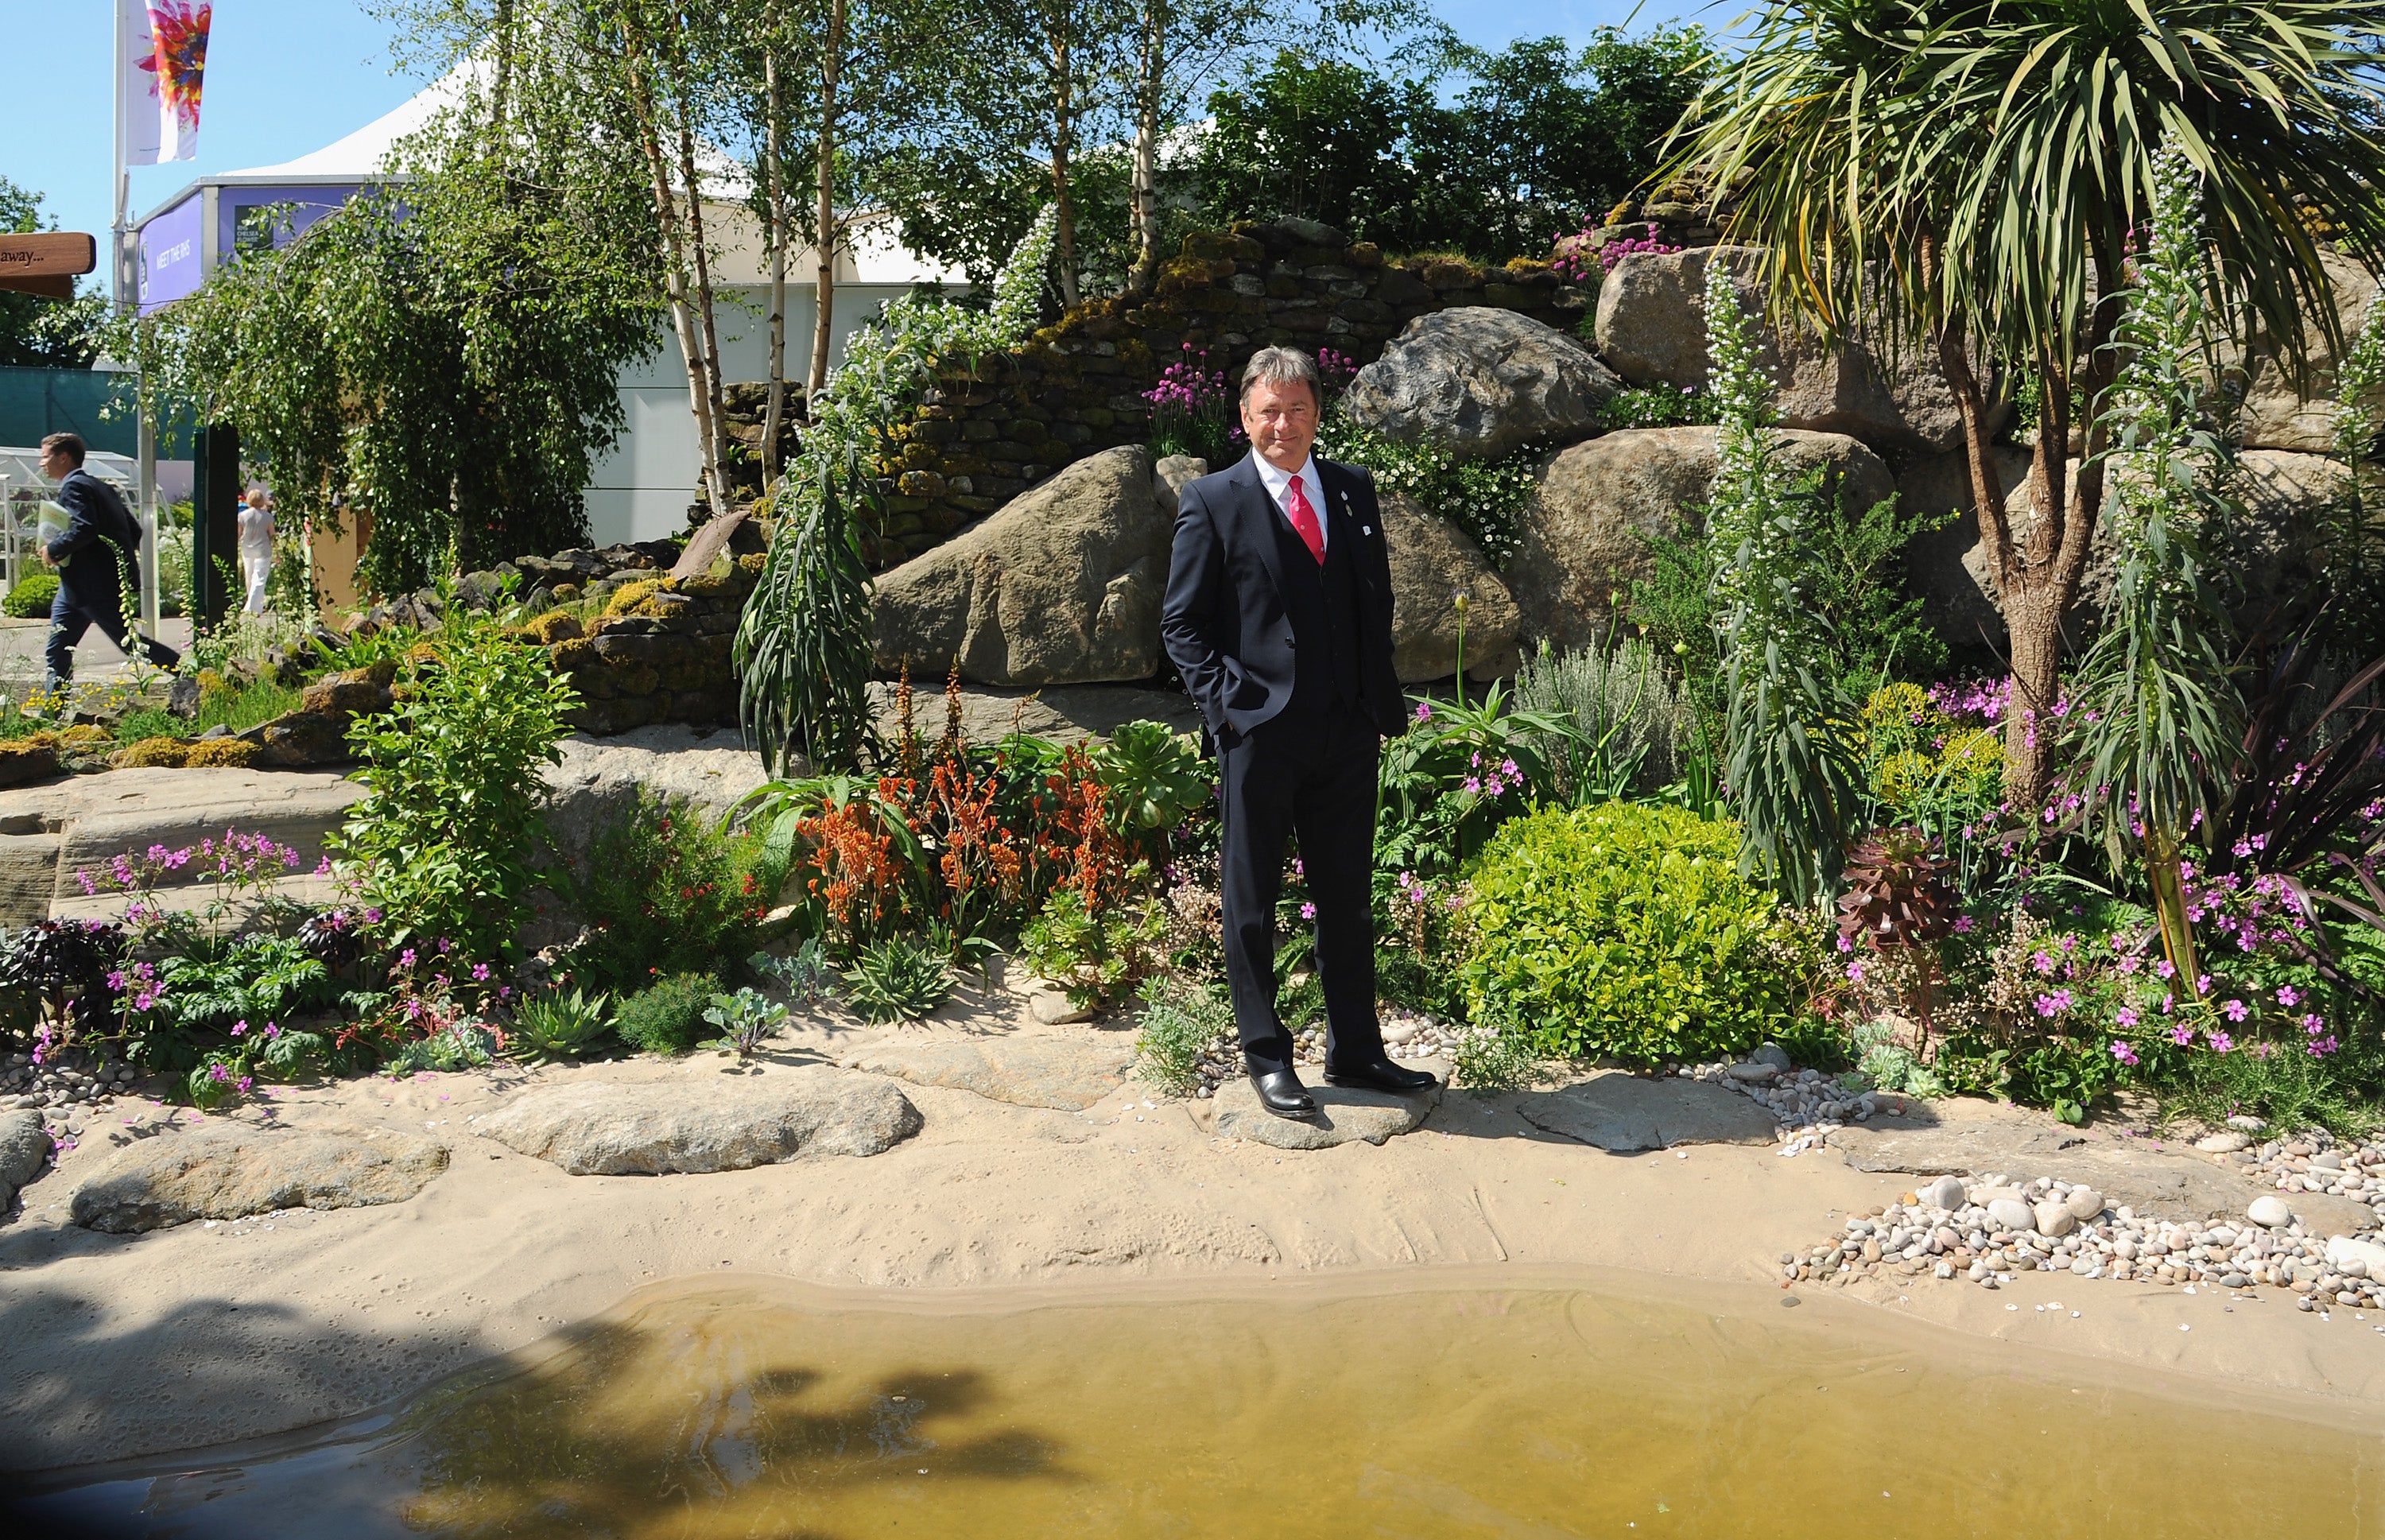 Alan Titchmarsh attends the VIP preview day of The Chelsea Flower Show at The Royal Hospital Chelsea on May 19, 2014